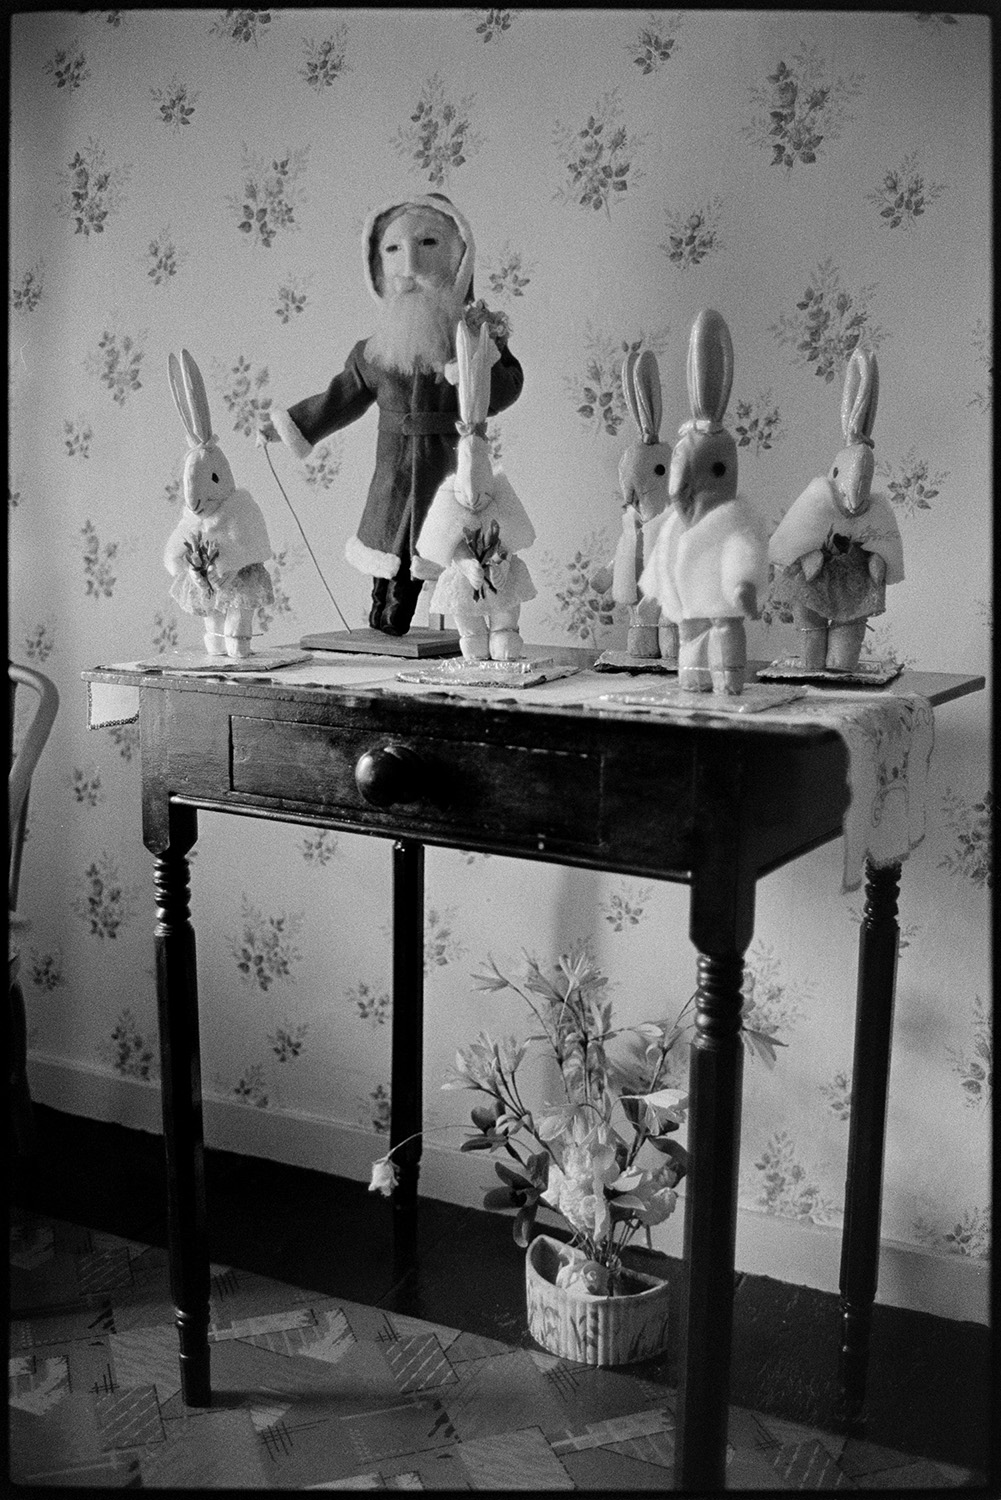 Stuffed toys on table, hand made. 
[Emily Easterbrook's hand made toys, including a Father Christmas and rabbits, displayed on a side table in her home at West Lane, Dolton. The wall is covered in floral patterned wallpaper and a flower display is underneath the table.]